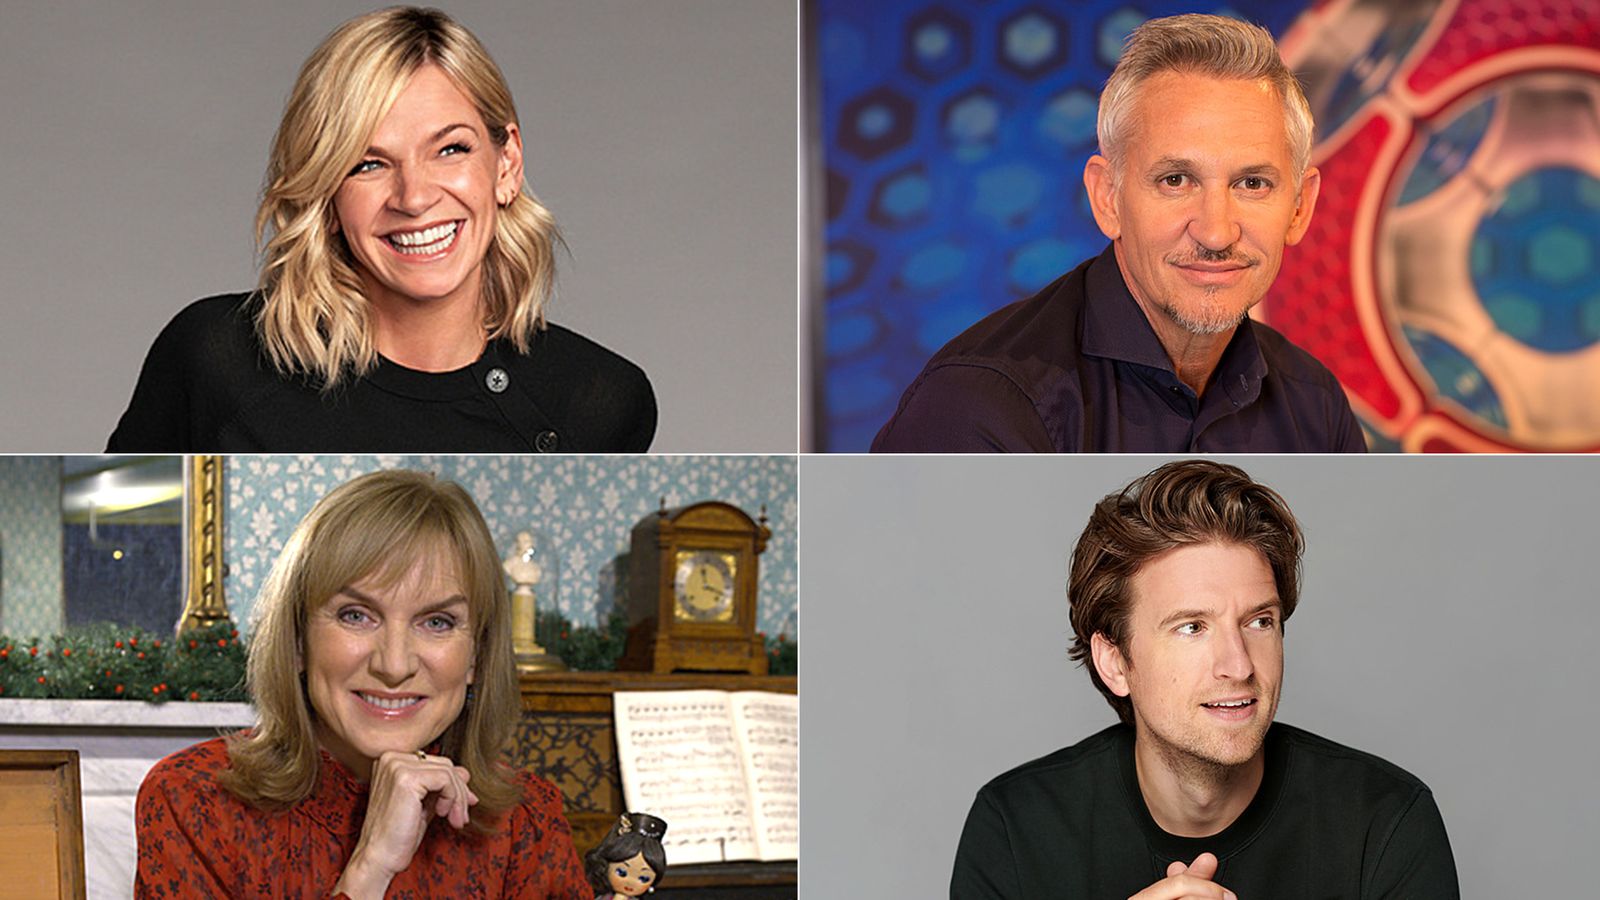 BBC reveals highest-paid stars: Gary Lineker, Zoe Ball and Greg James among broadcaster's top earners